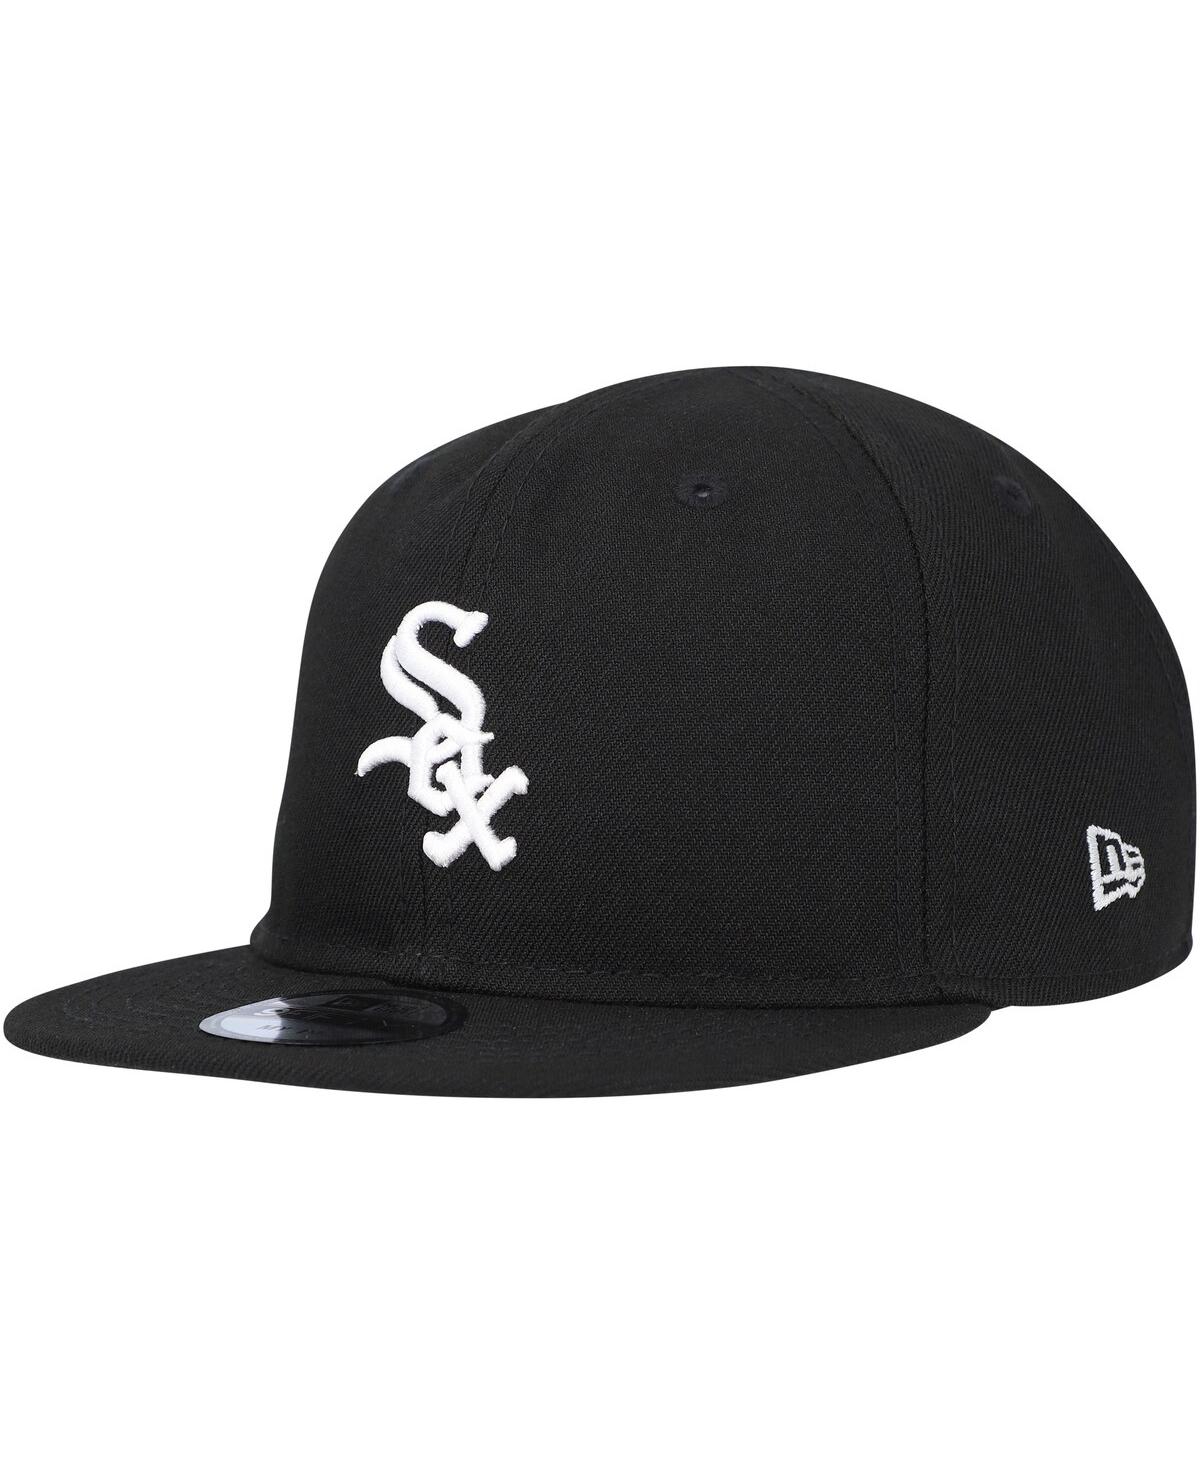 New Era Babies' Infant Boys And Girls  Black Chicago White Sox My First 9fifty Adjustable Hat